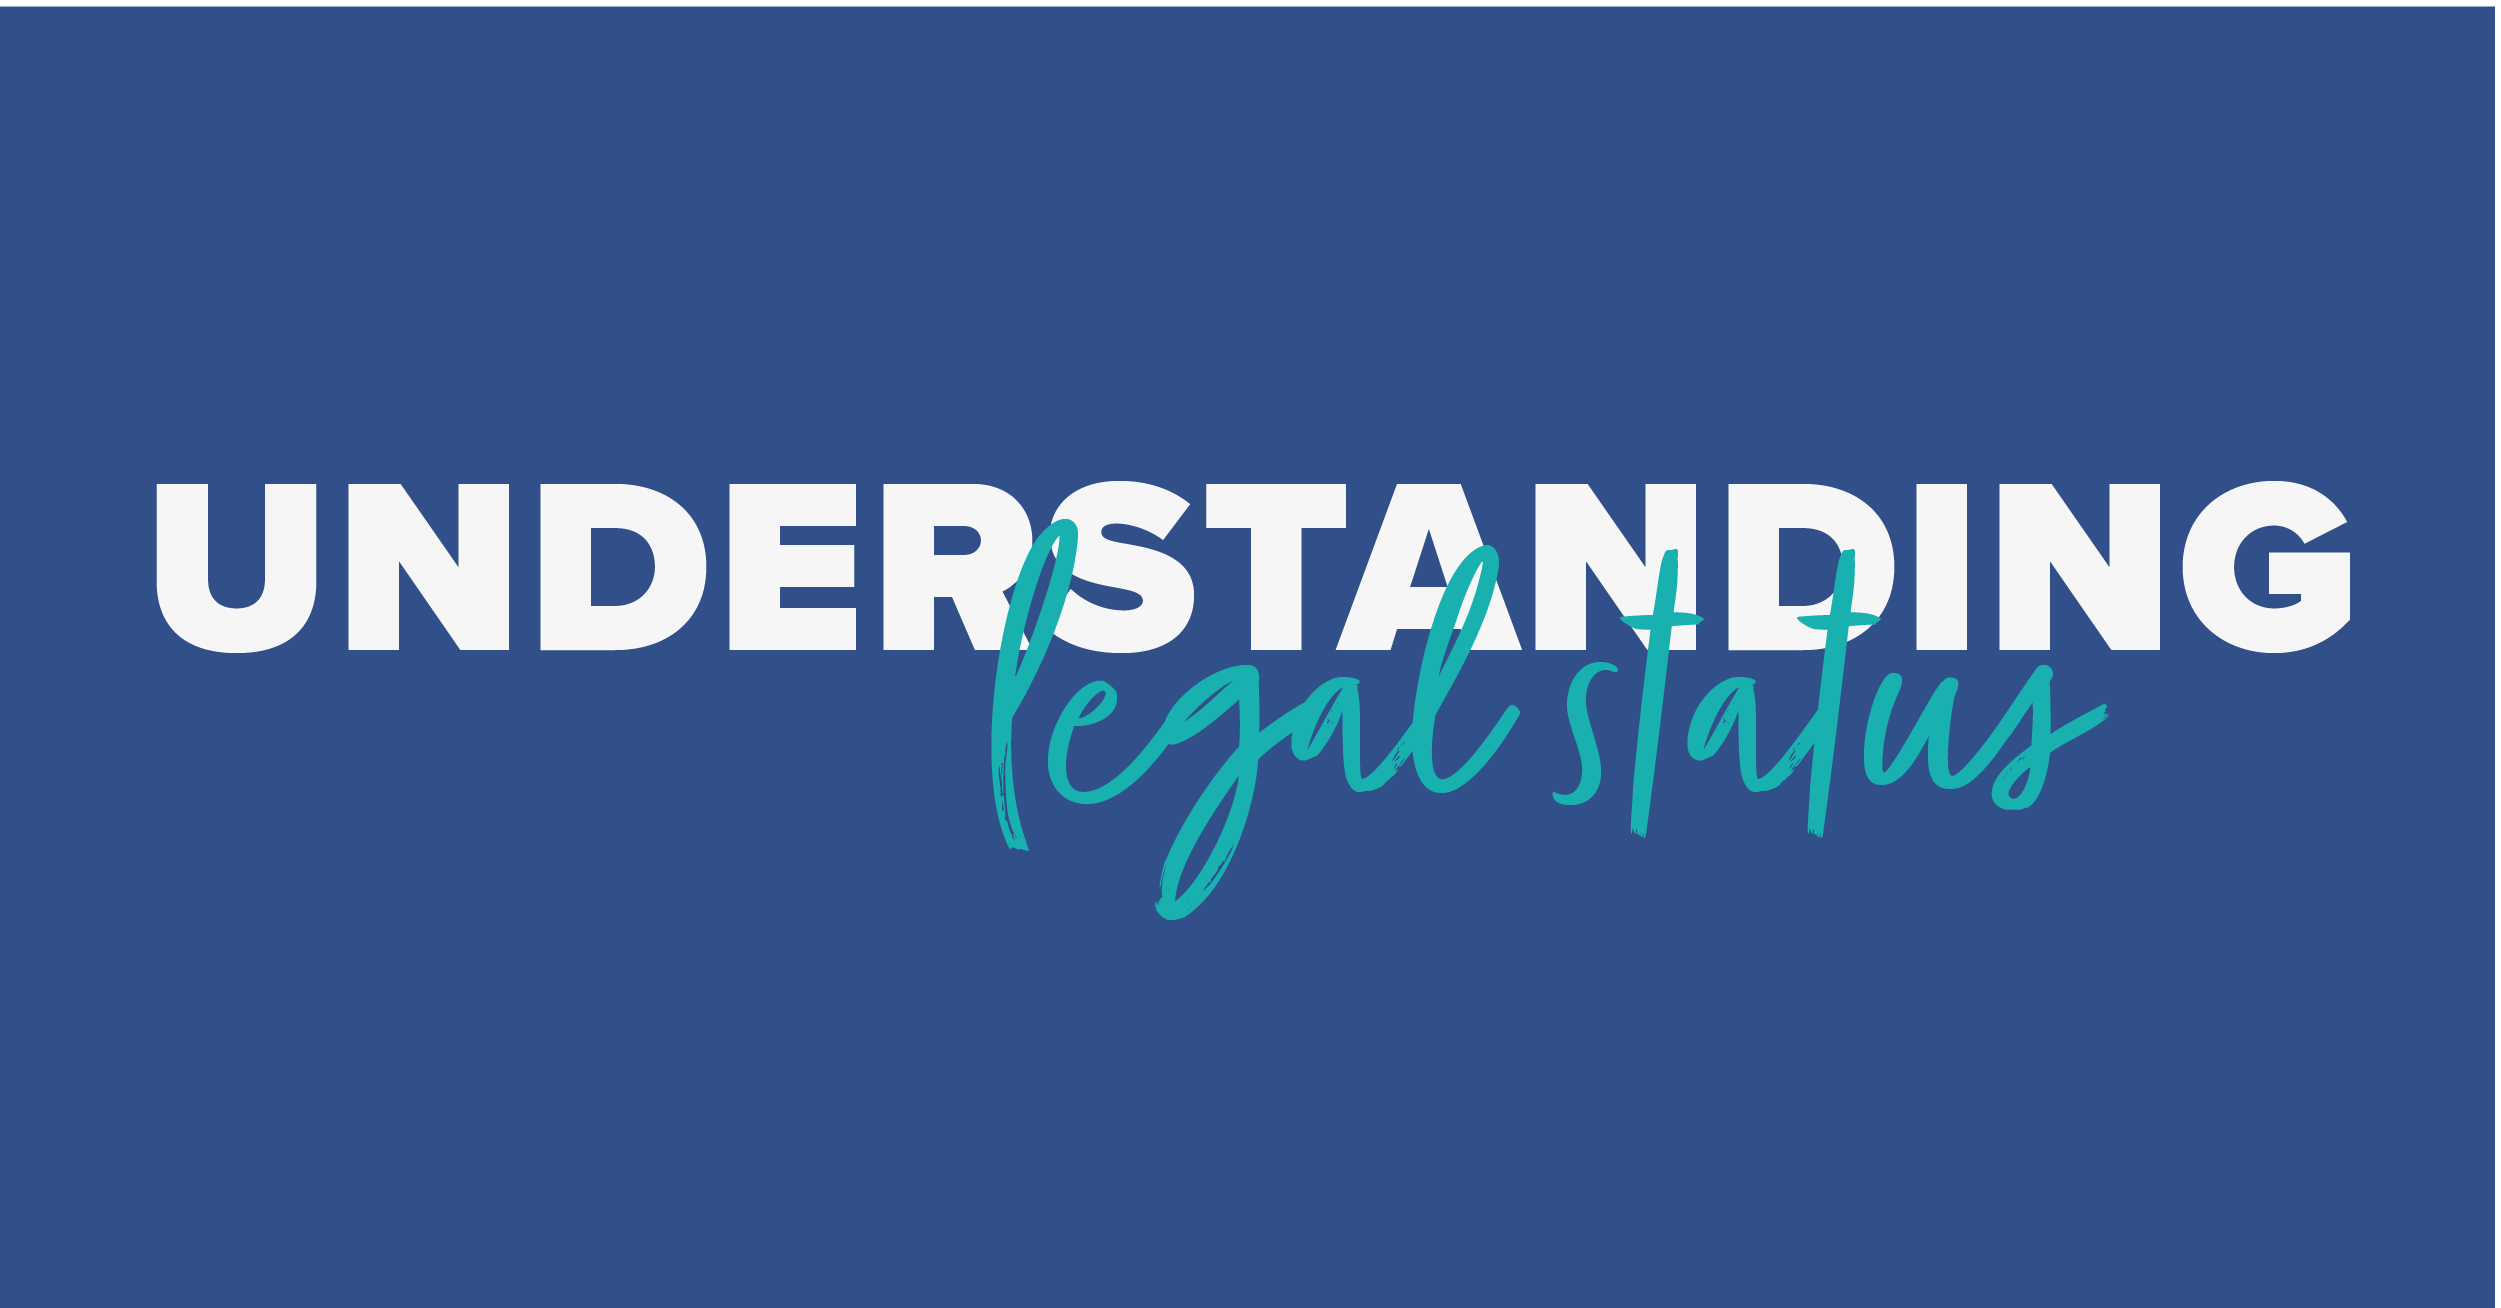 Legal Status: Understanding legal risk, legally freed, and adoption from foster care